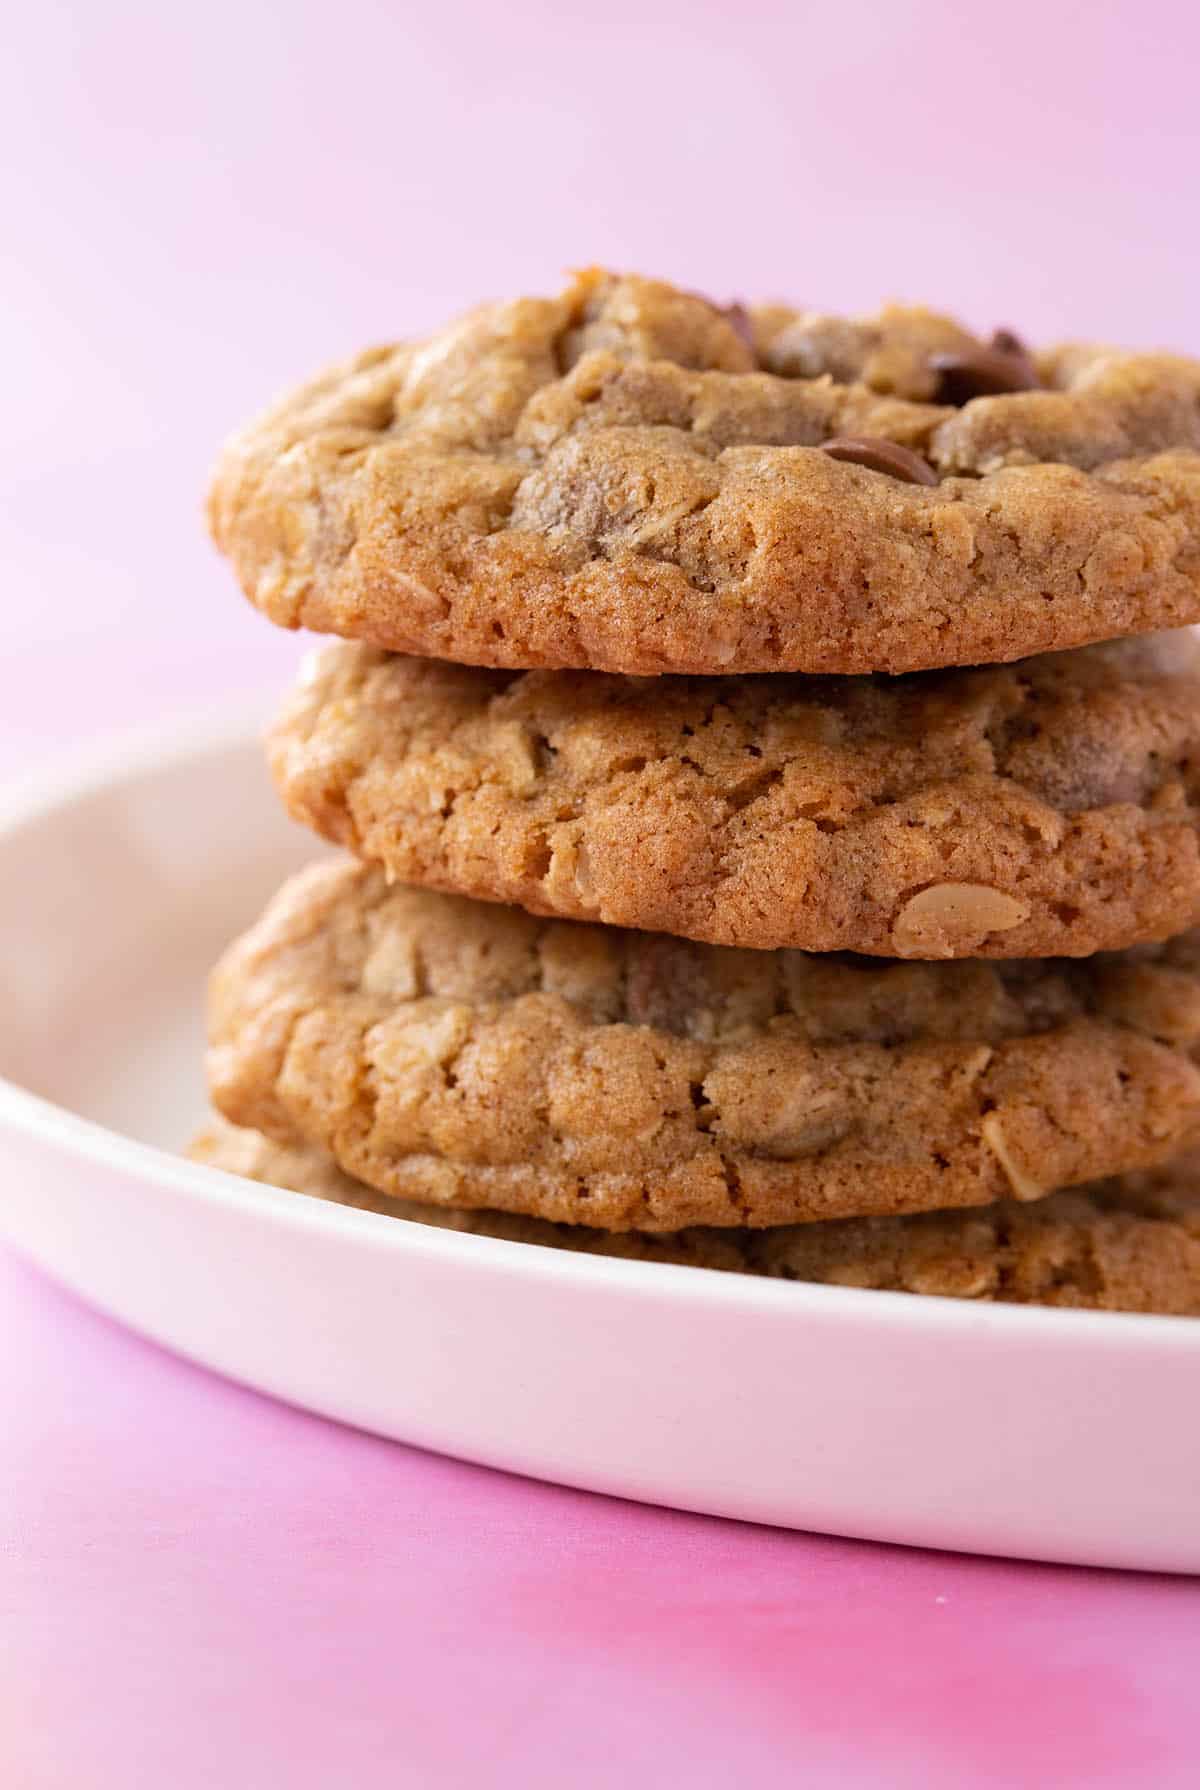 A stack of thick Oatmeal Cookies on a white plate.